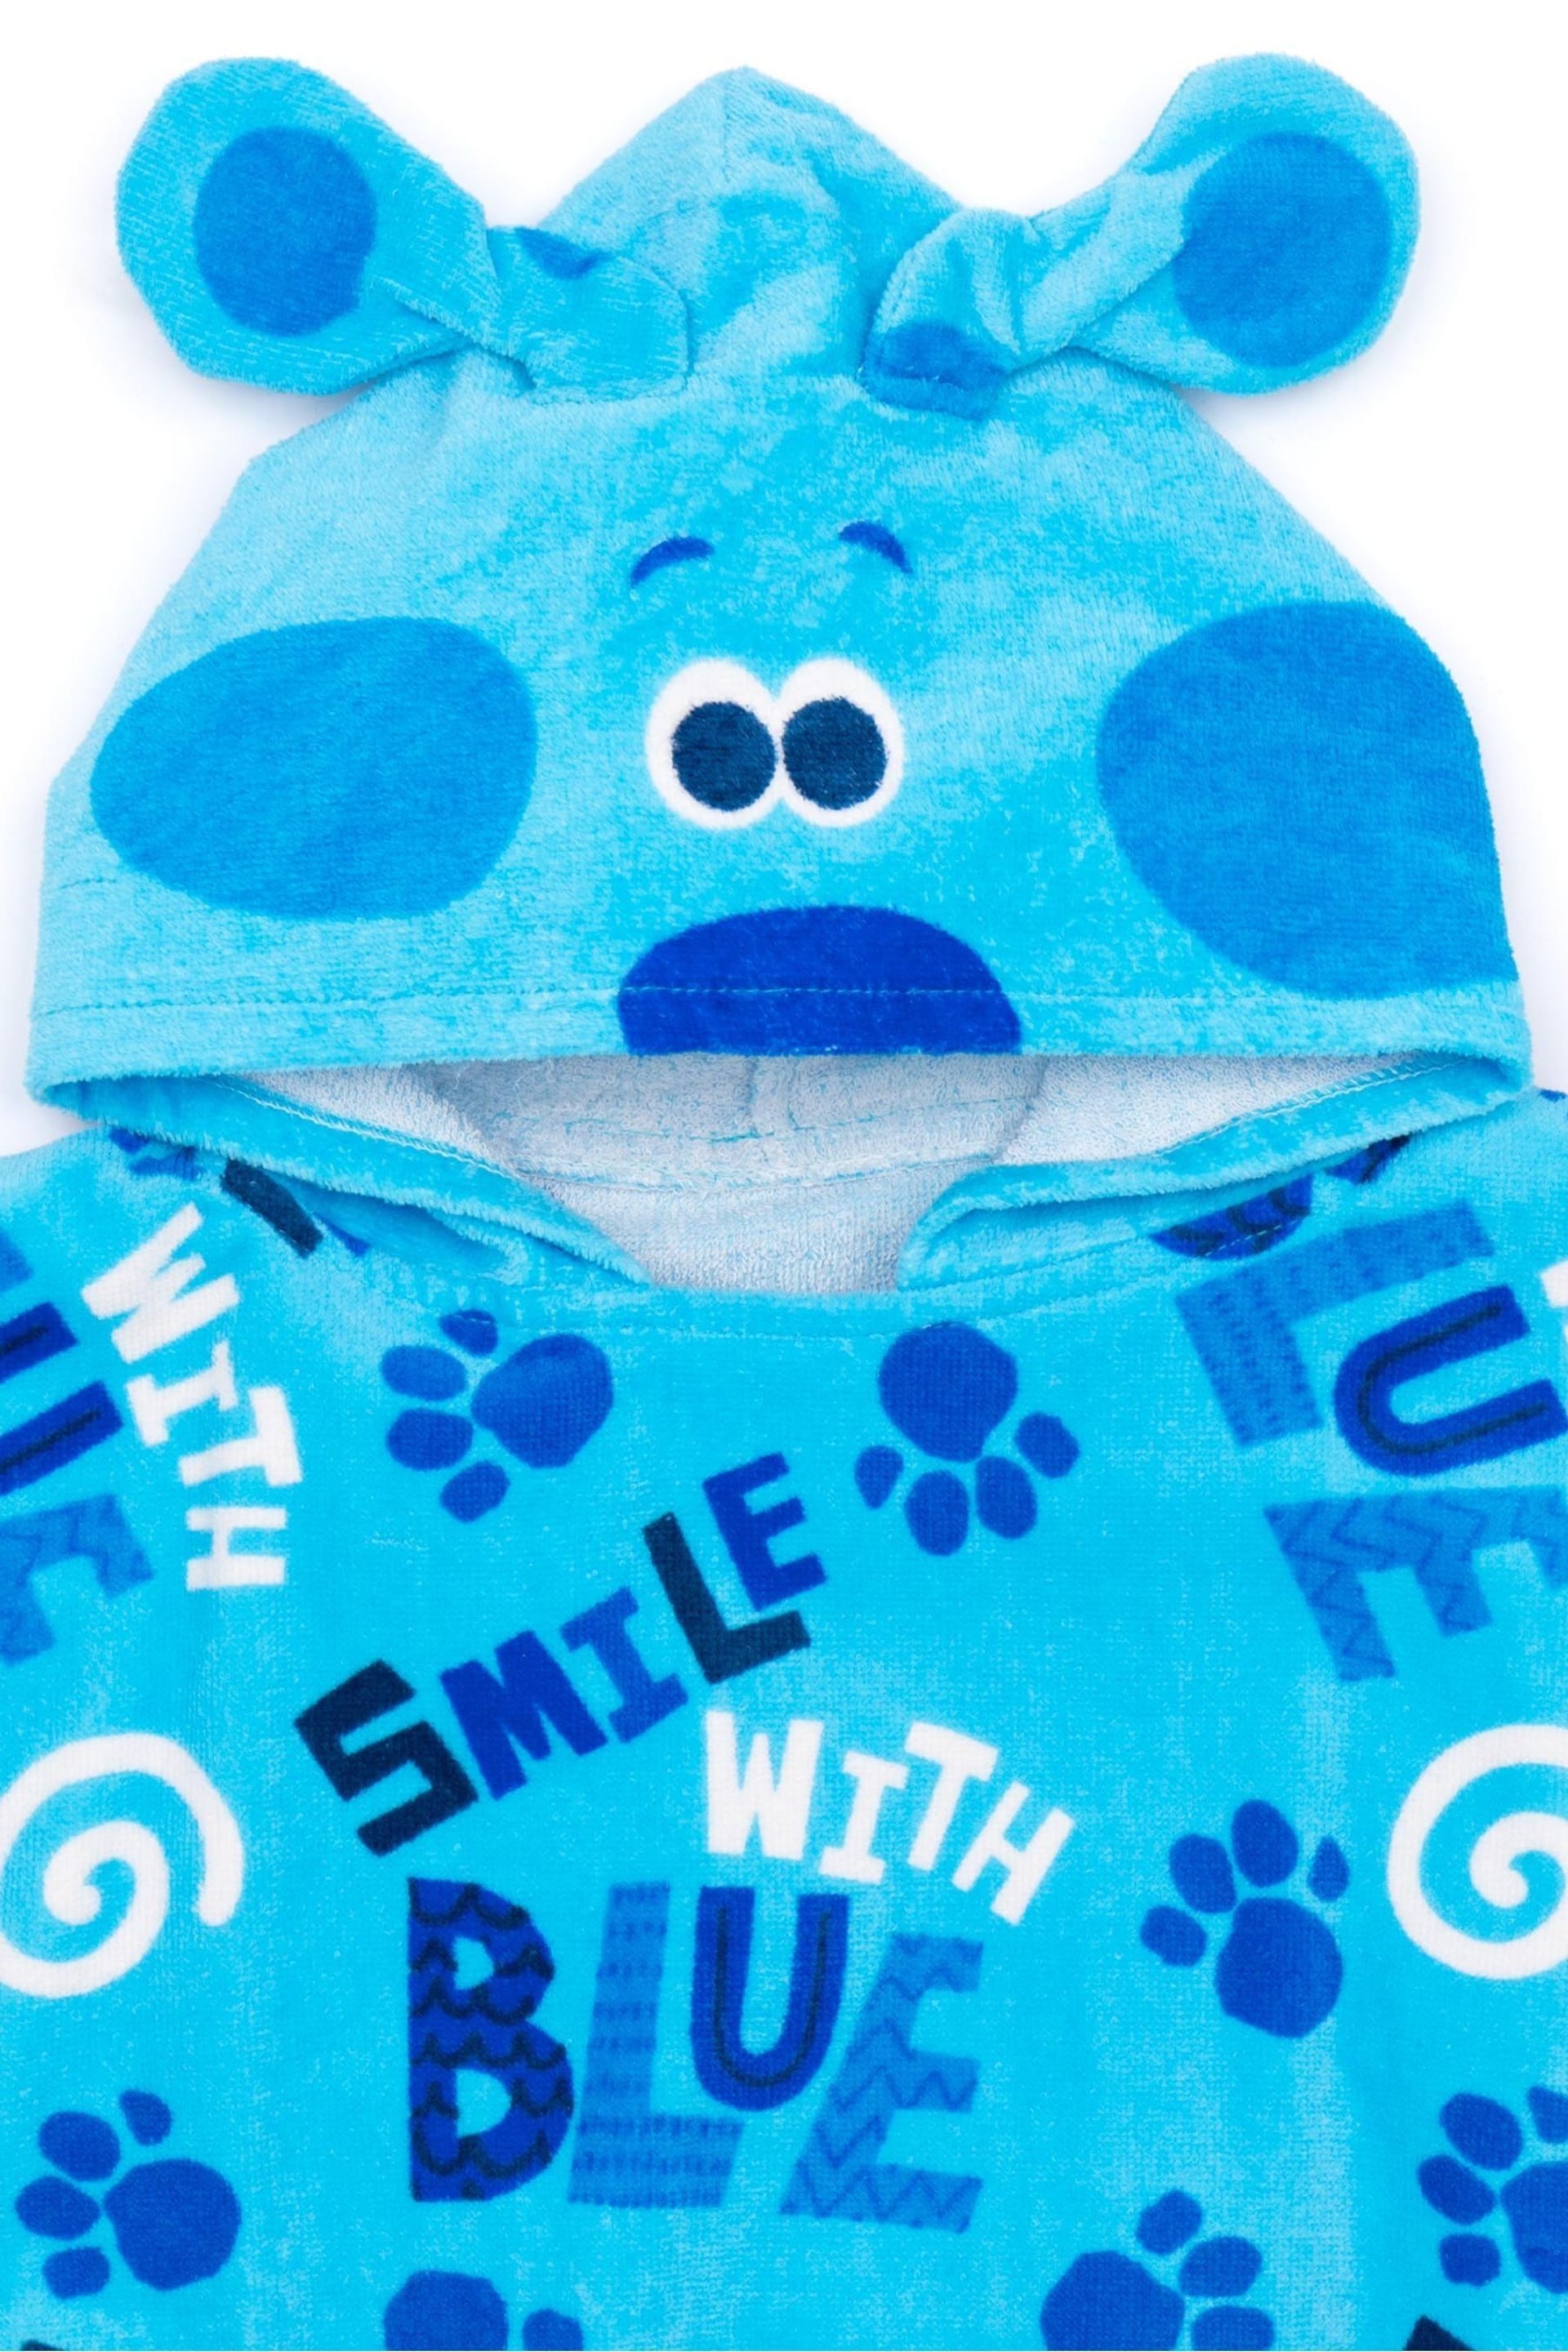 Vanilla Underground Blue Kids Clues Character Towel Poncho - Image 2 of 5